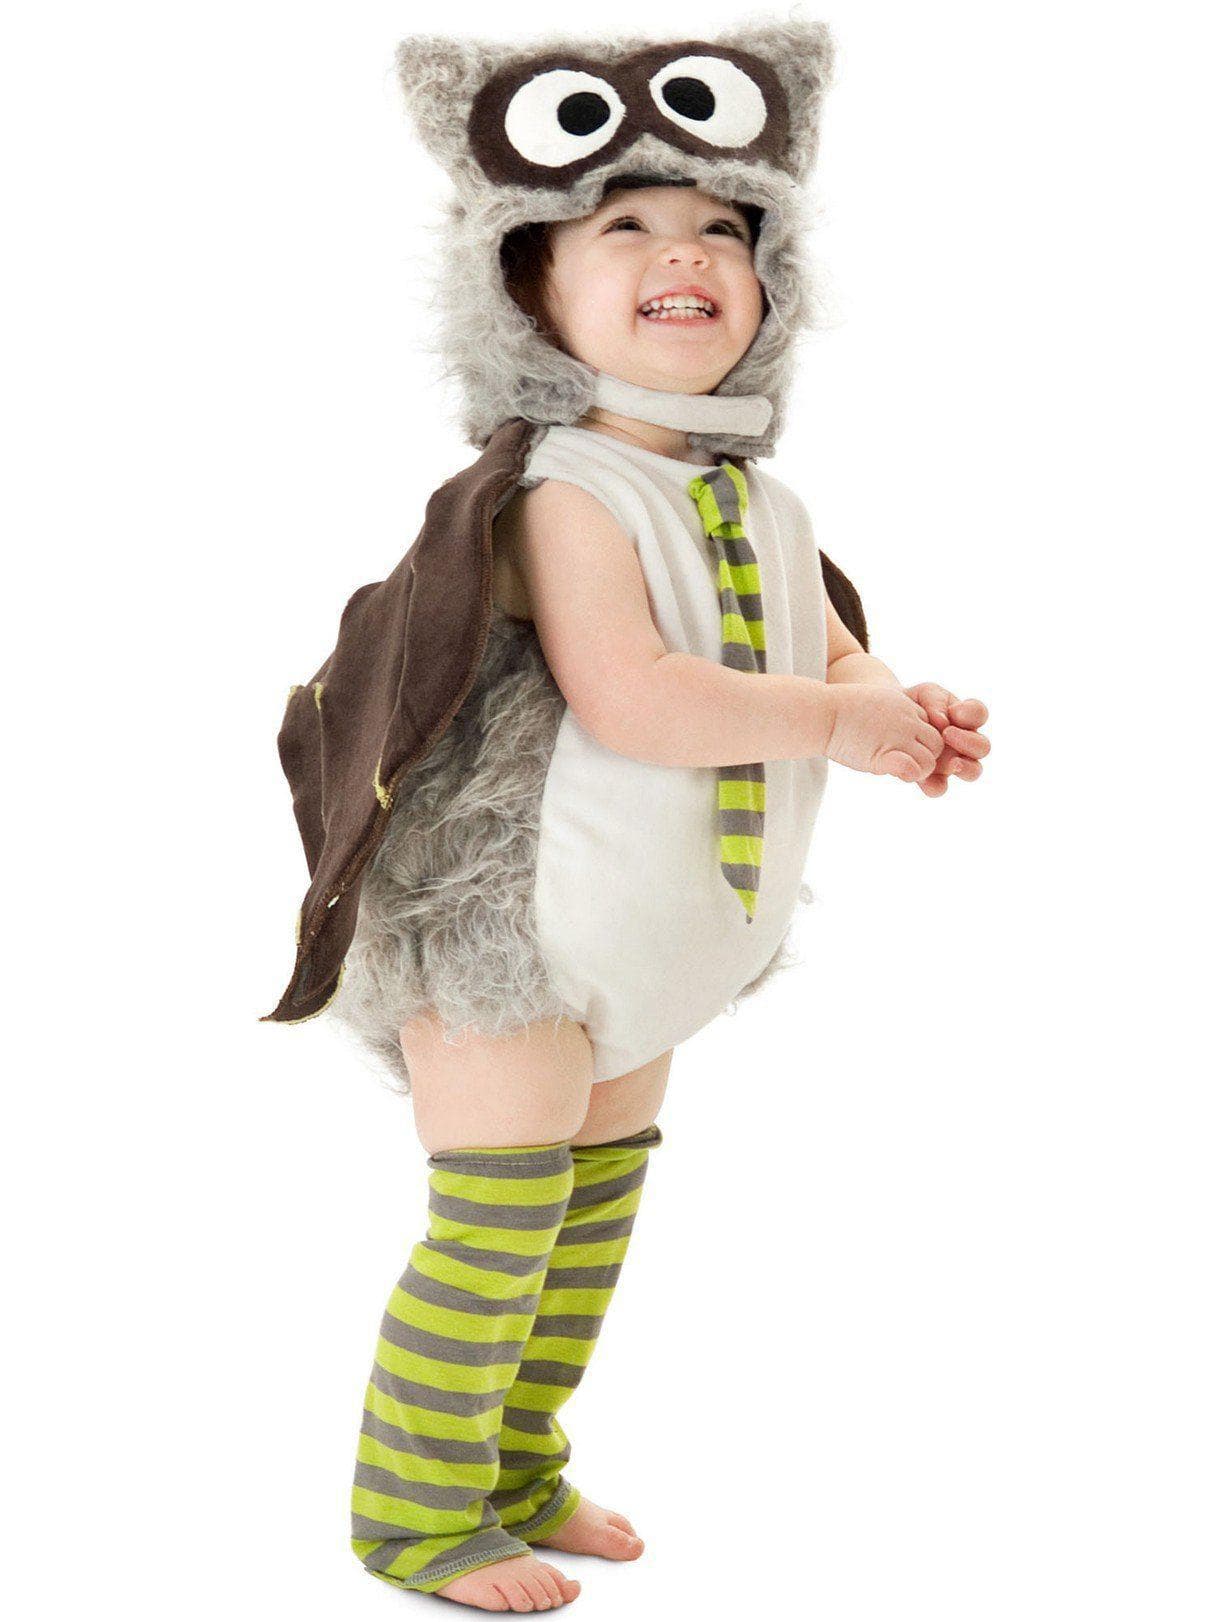 Baby/Toddler Edward the Owl Costume - costumes.com